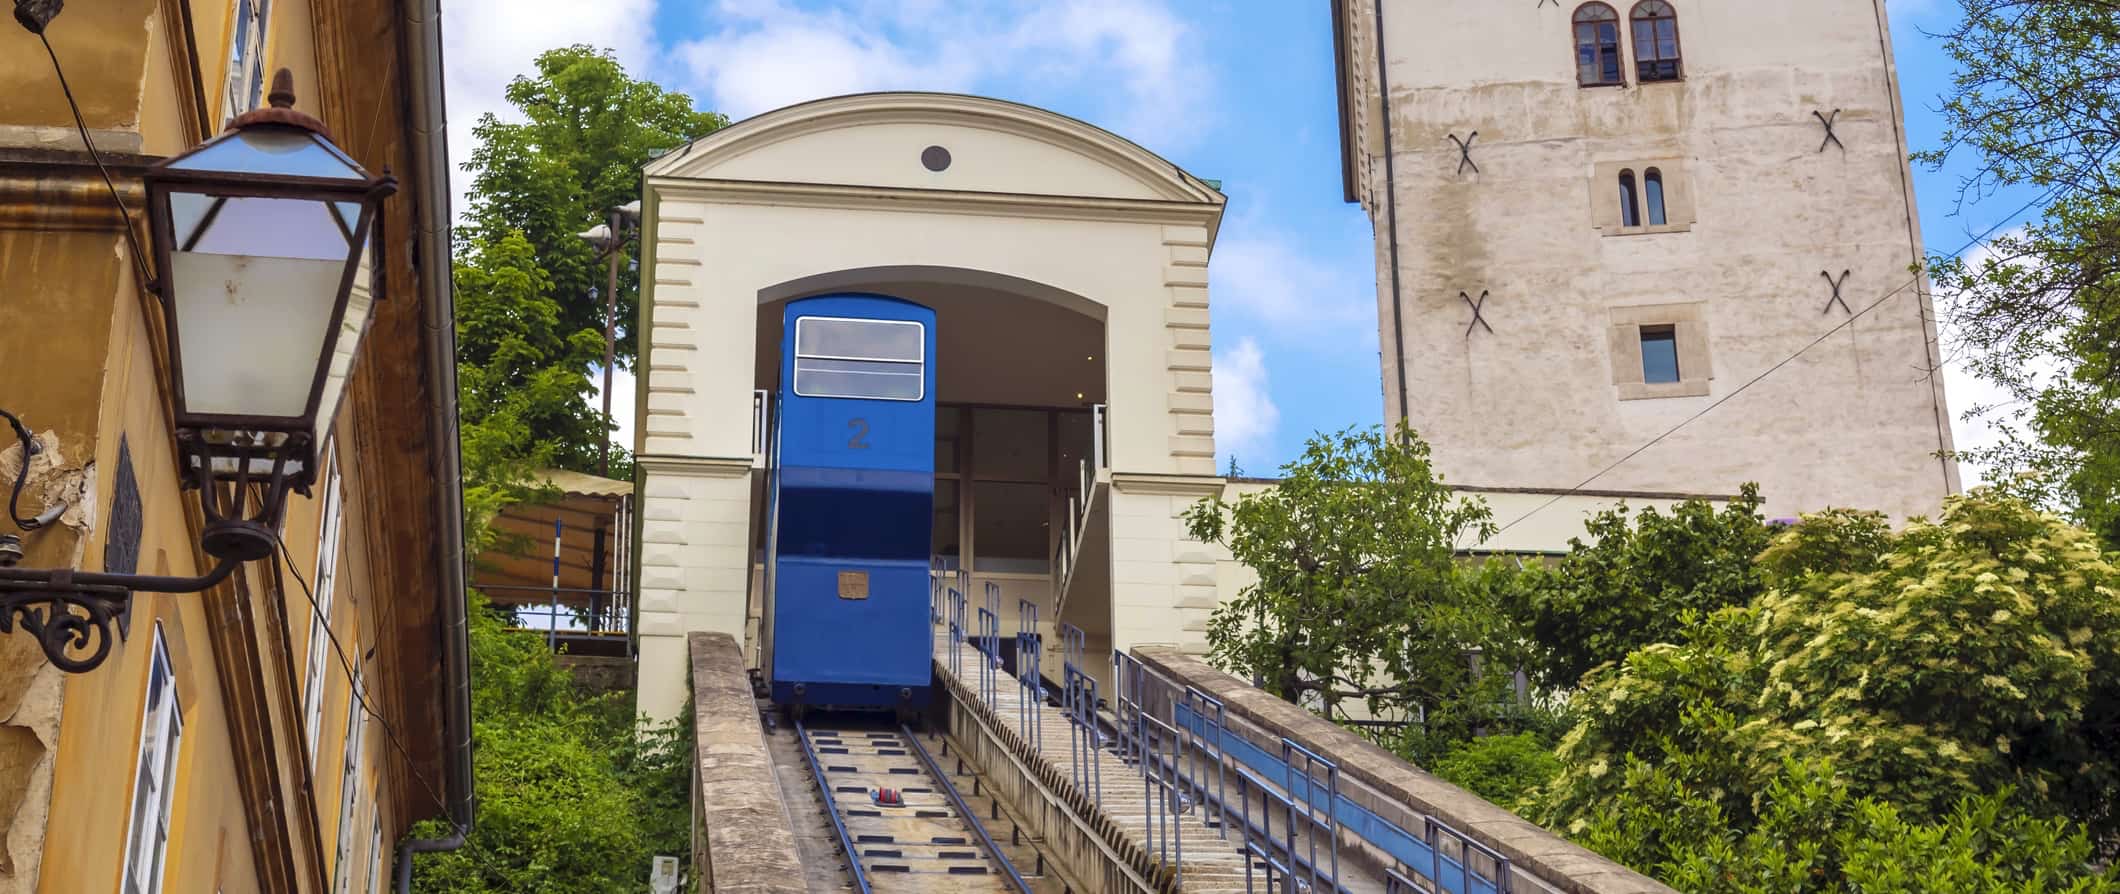 The old funicular going up a hill in Zagreb, Croatia